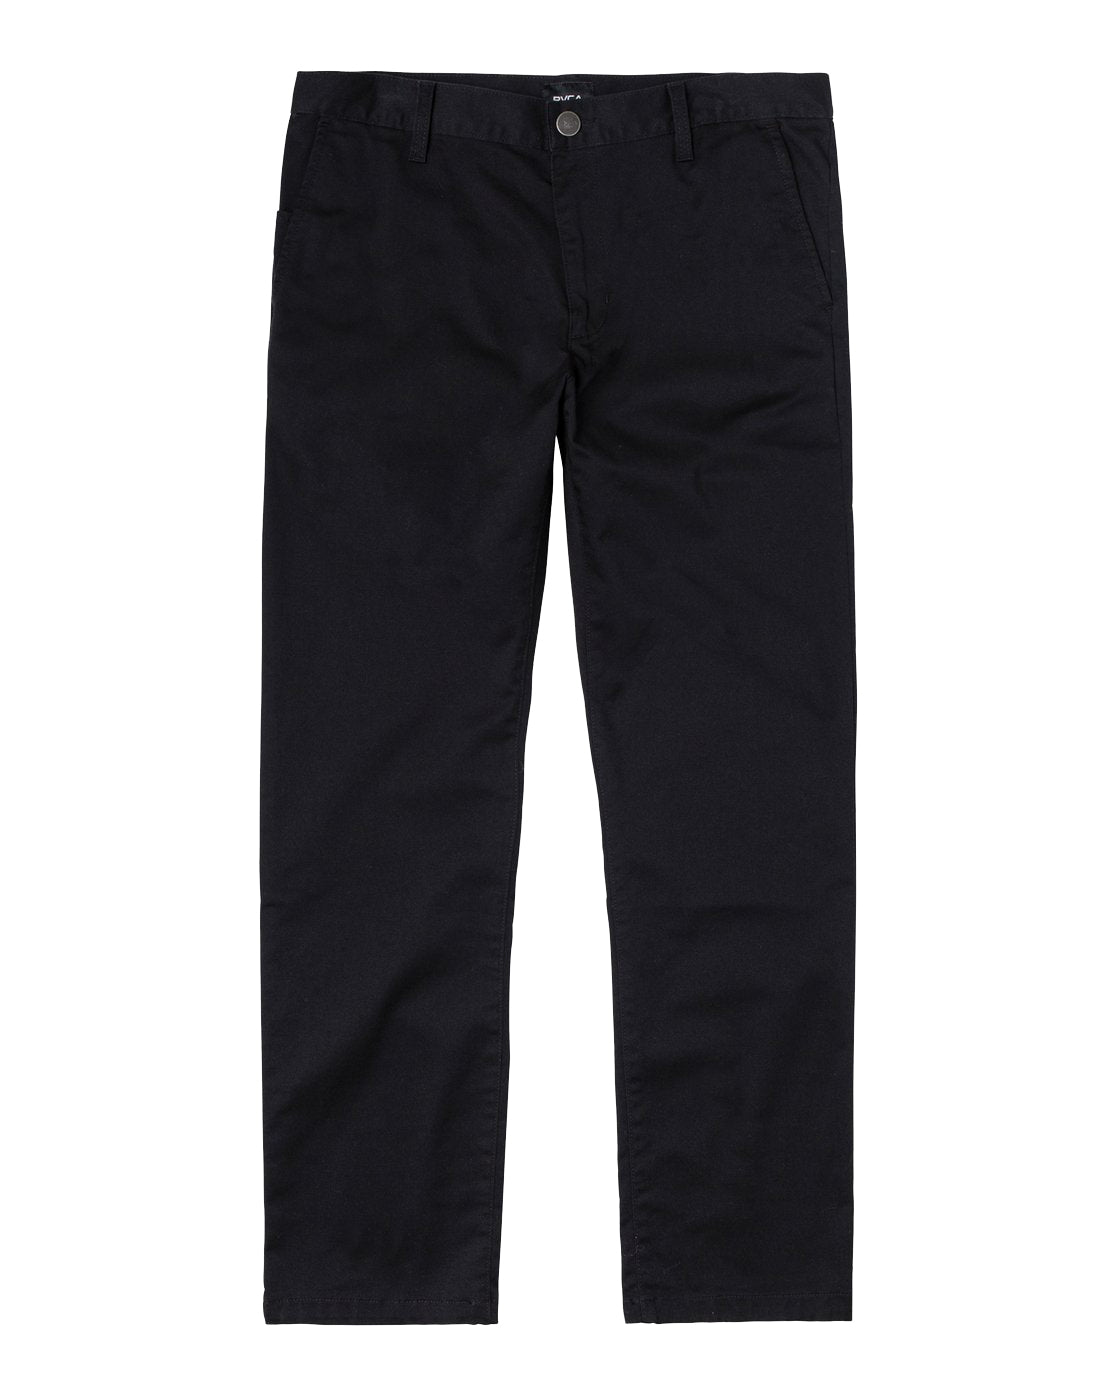 RVCA Weekend Stretch Straight Fit Pant BLK 34